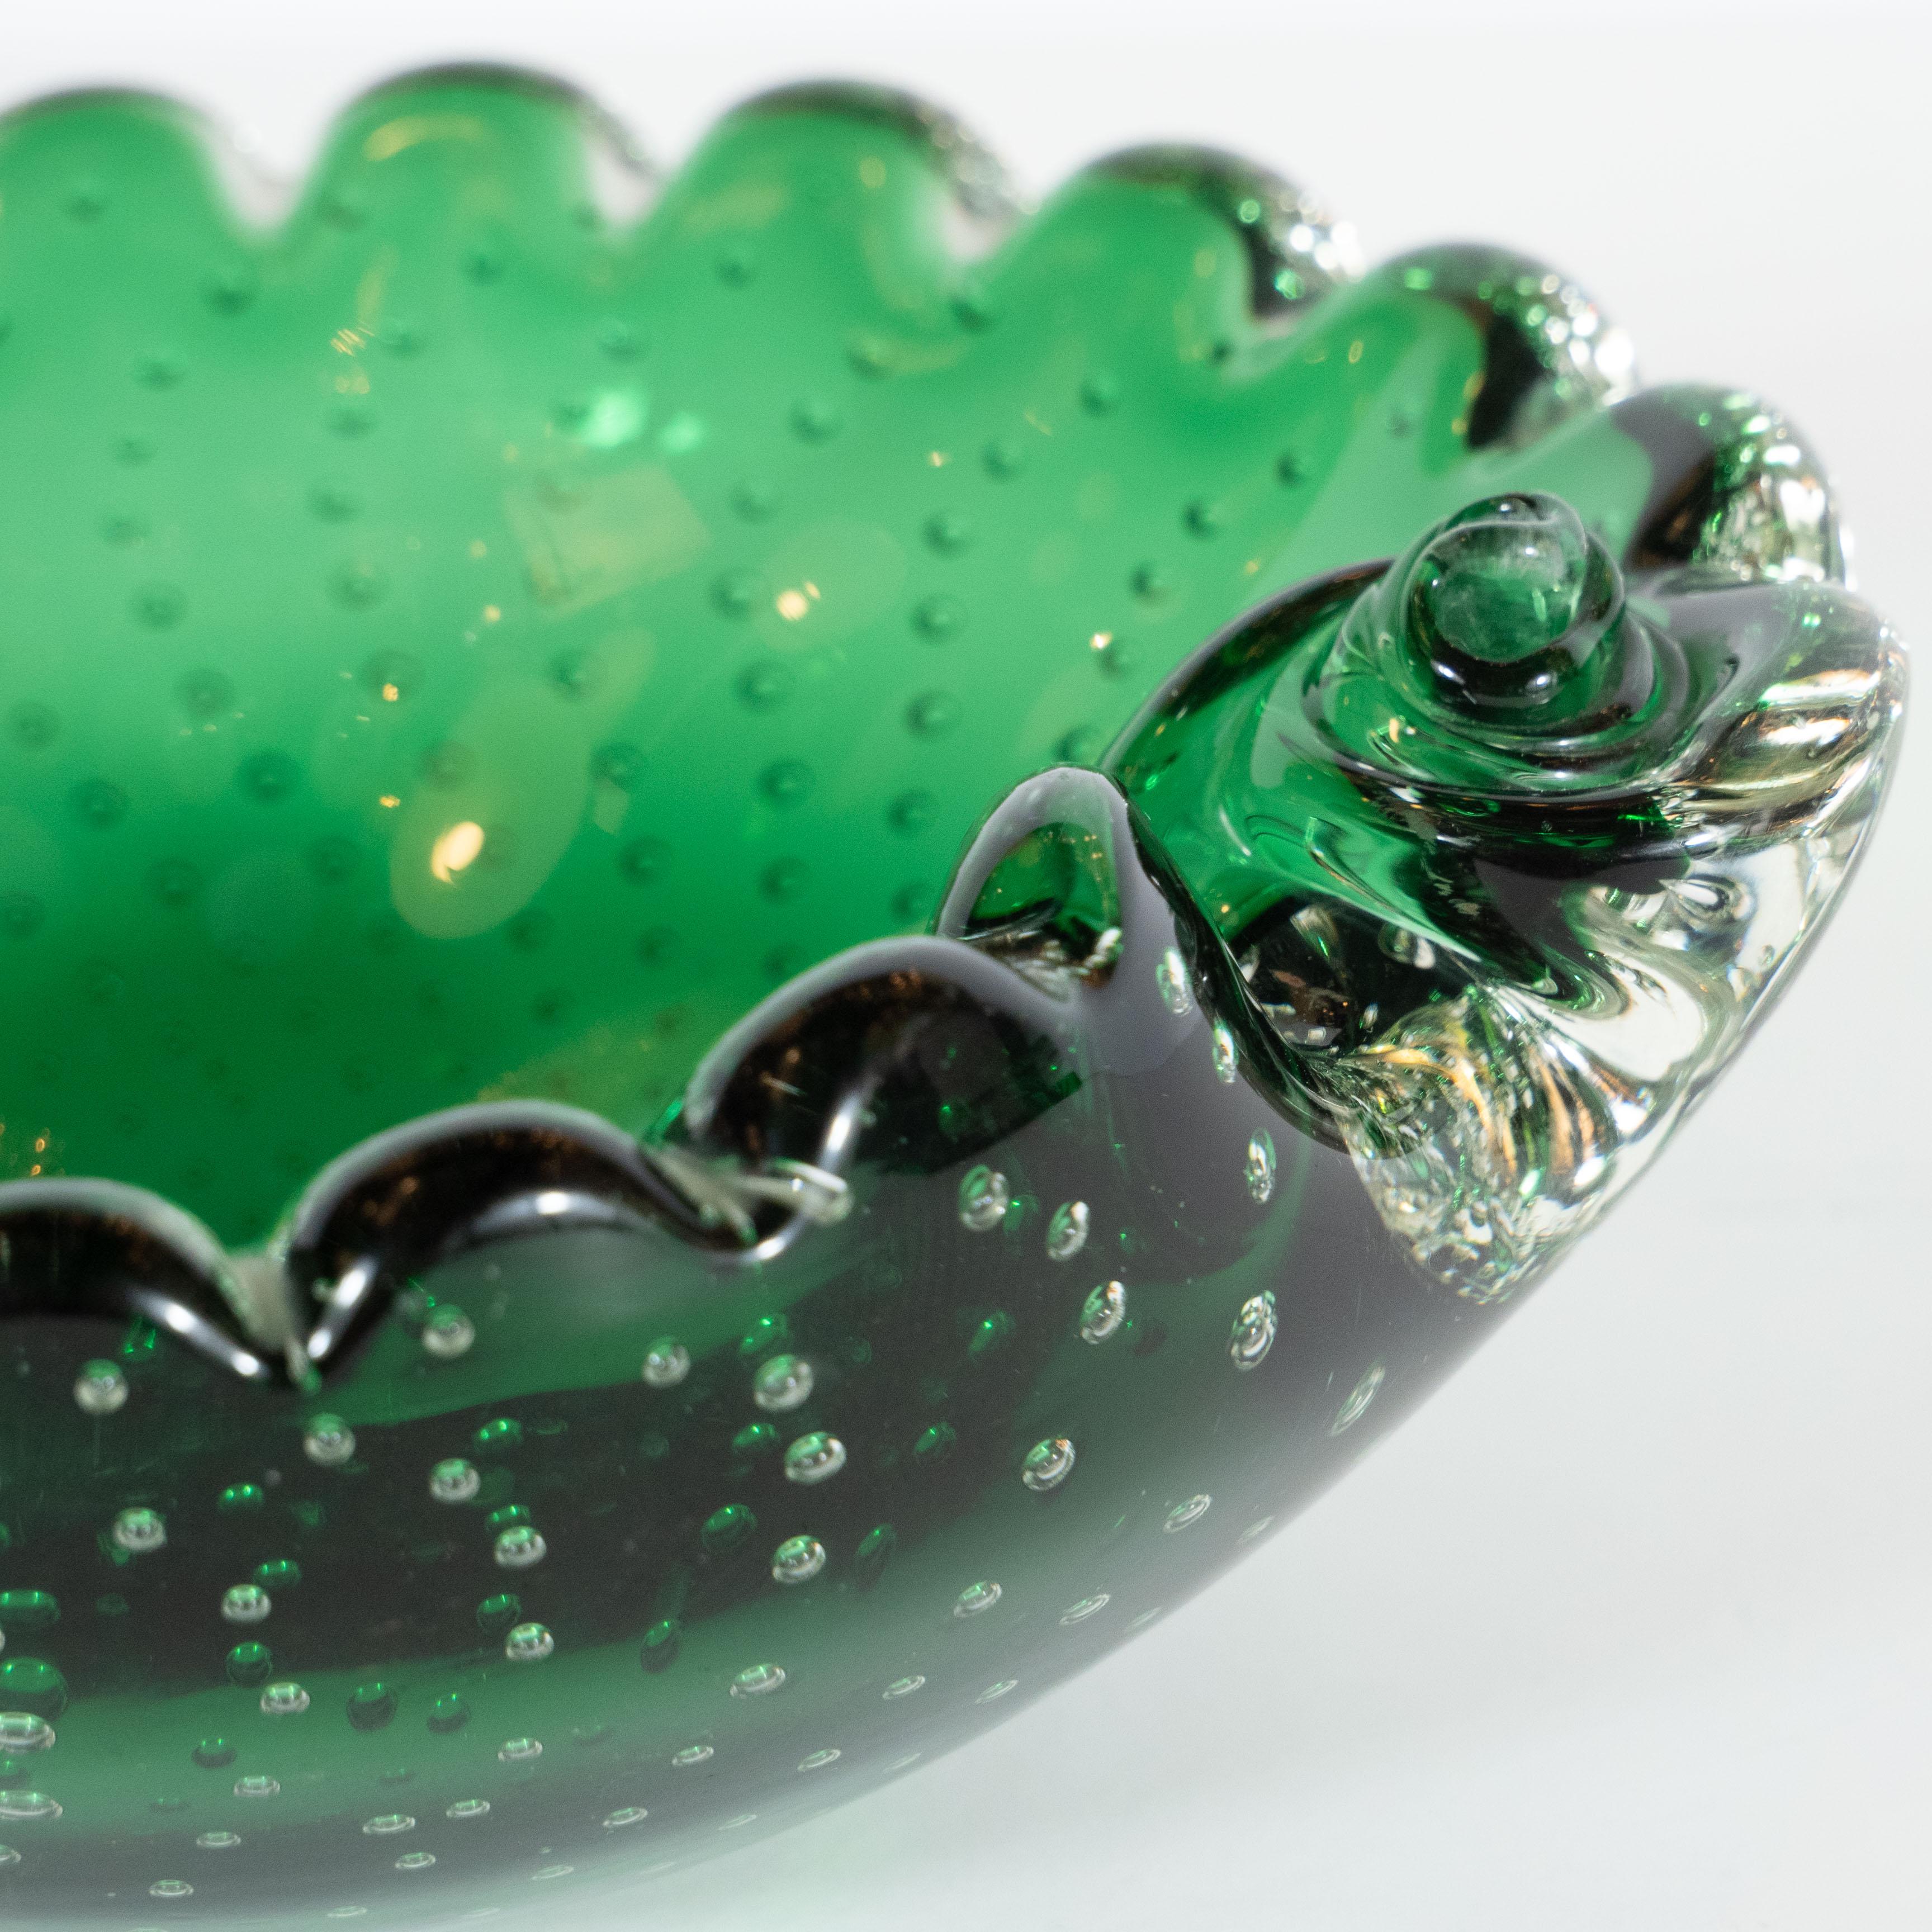 This elegant glass bowl was handblown in Murano, Italy - the island off the coast of Venice centuries renowned for its superlative glass production- circa 1960. Resembling a leaf, the asymmetrical rim of the bowl has scalloped edges and offer a